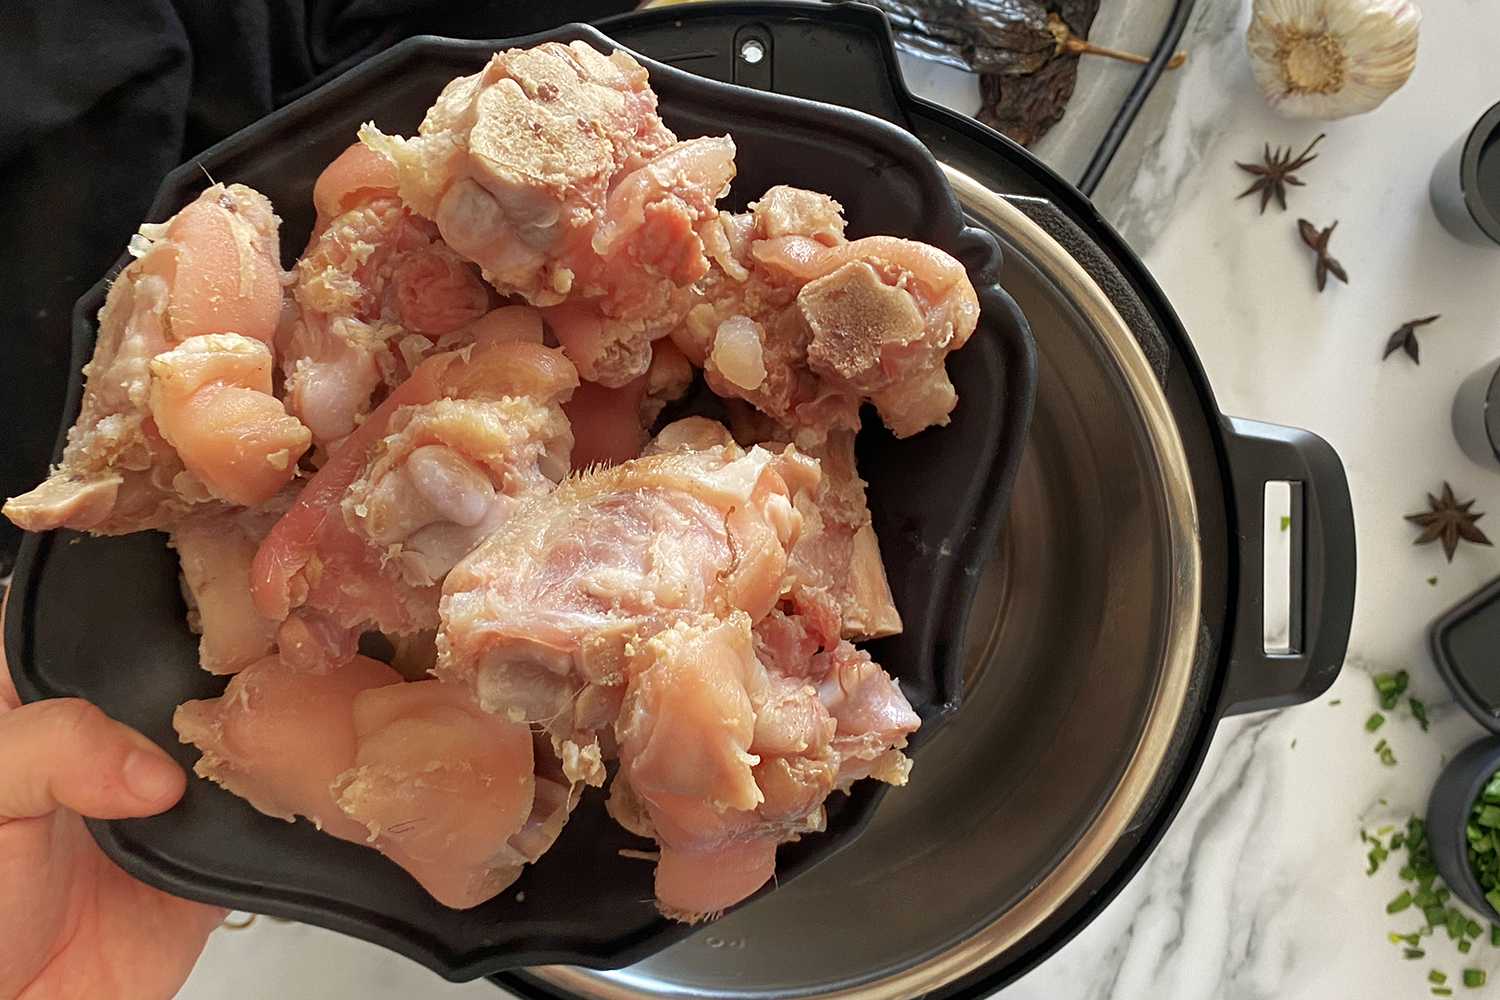 How Long Do I Cook Pigs Feet In A Electric Pressure Cooker